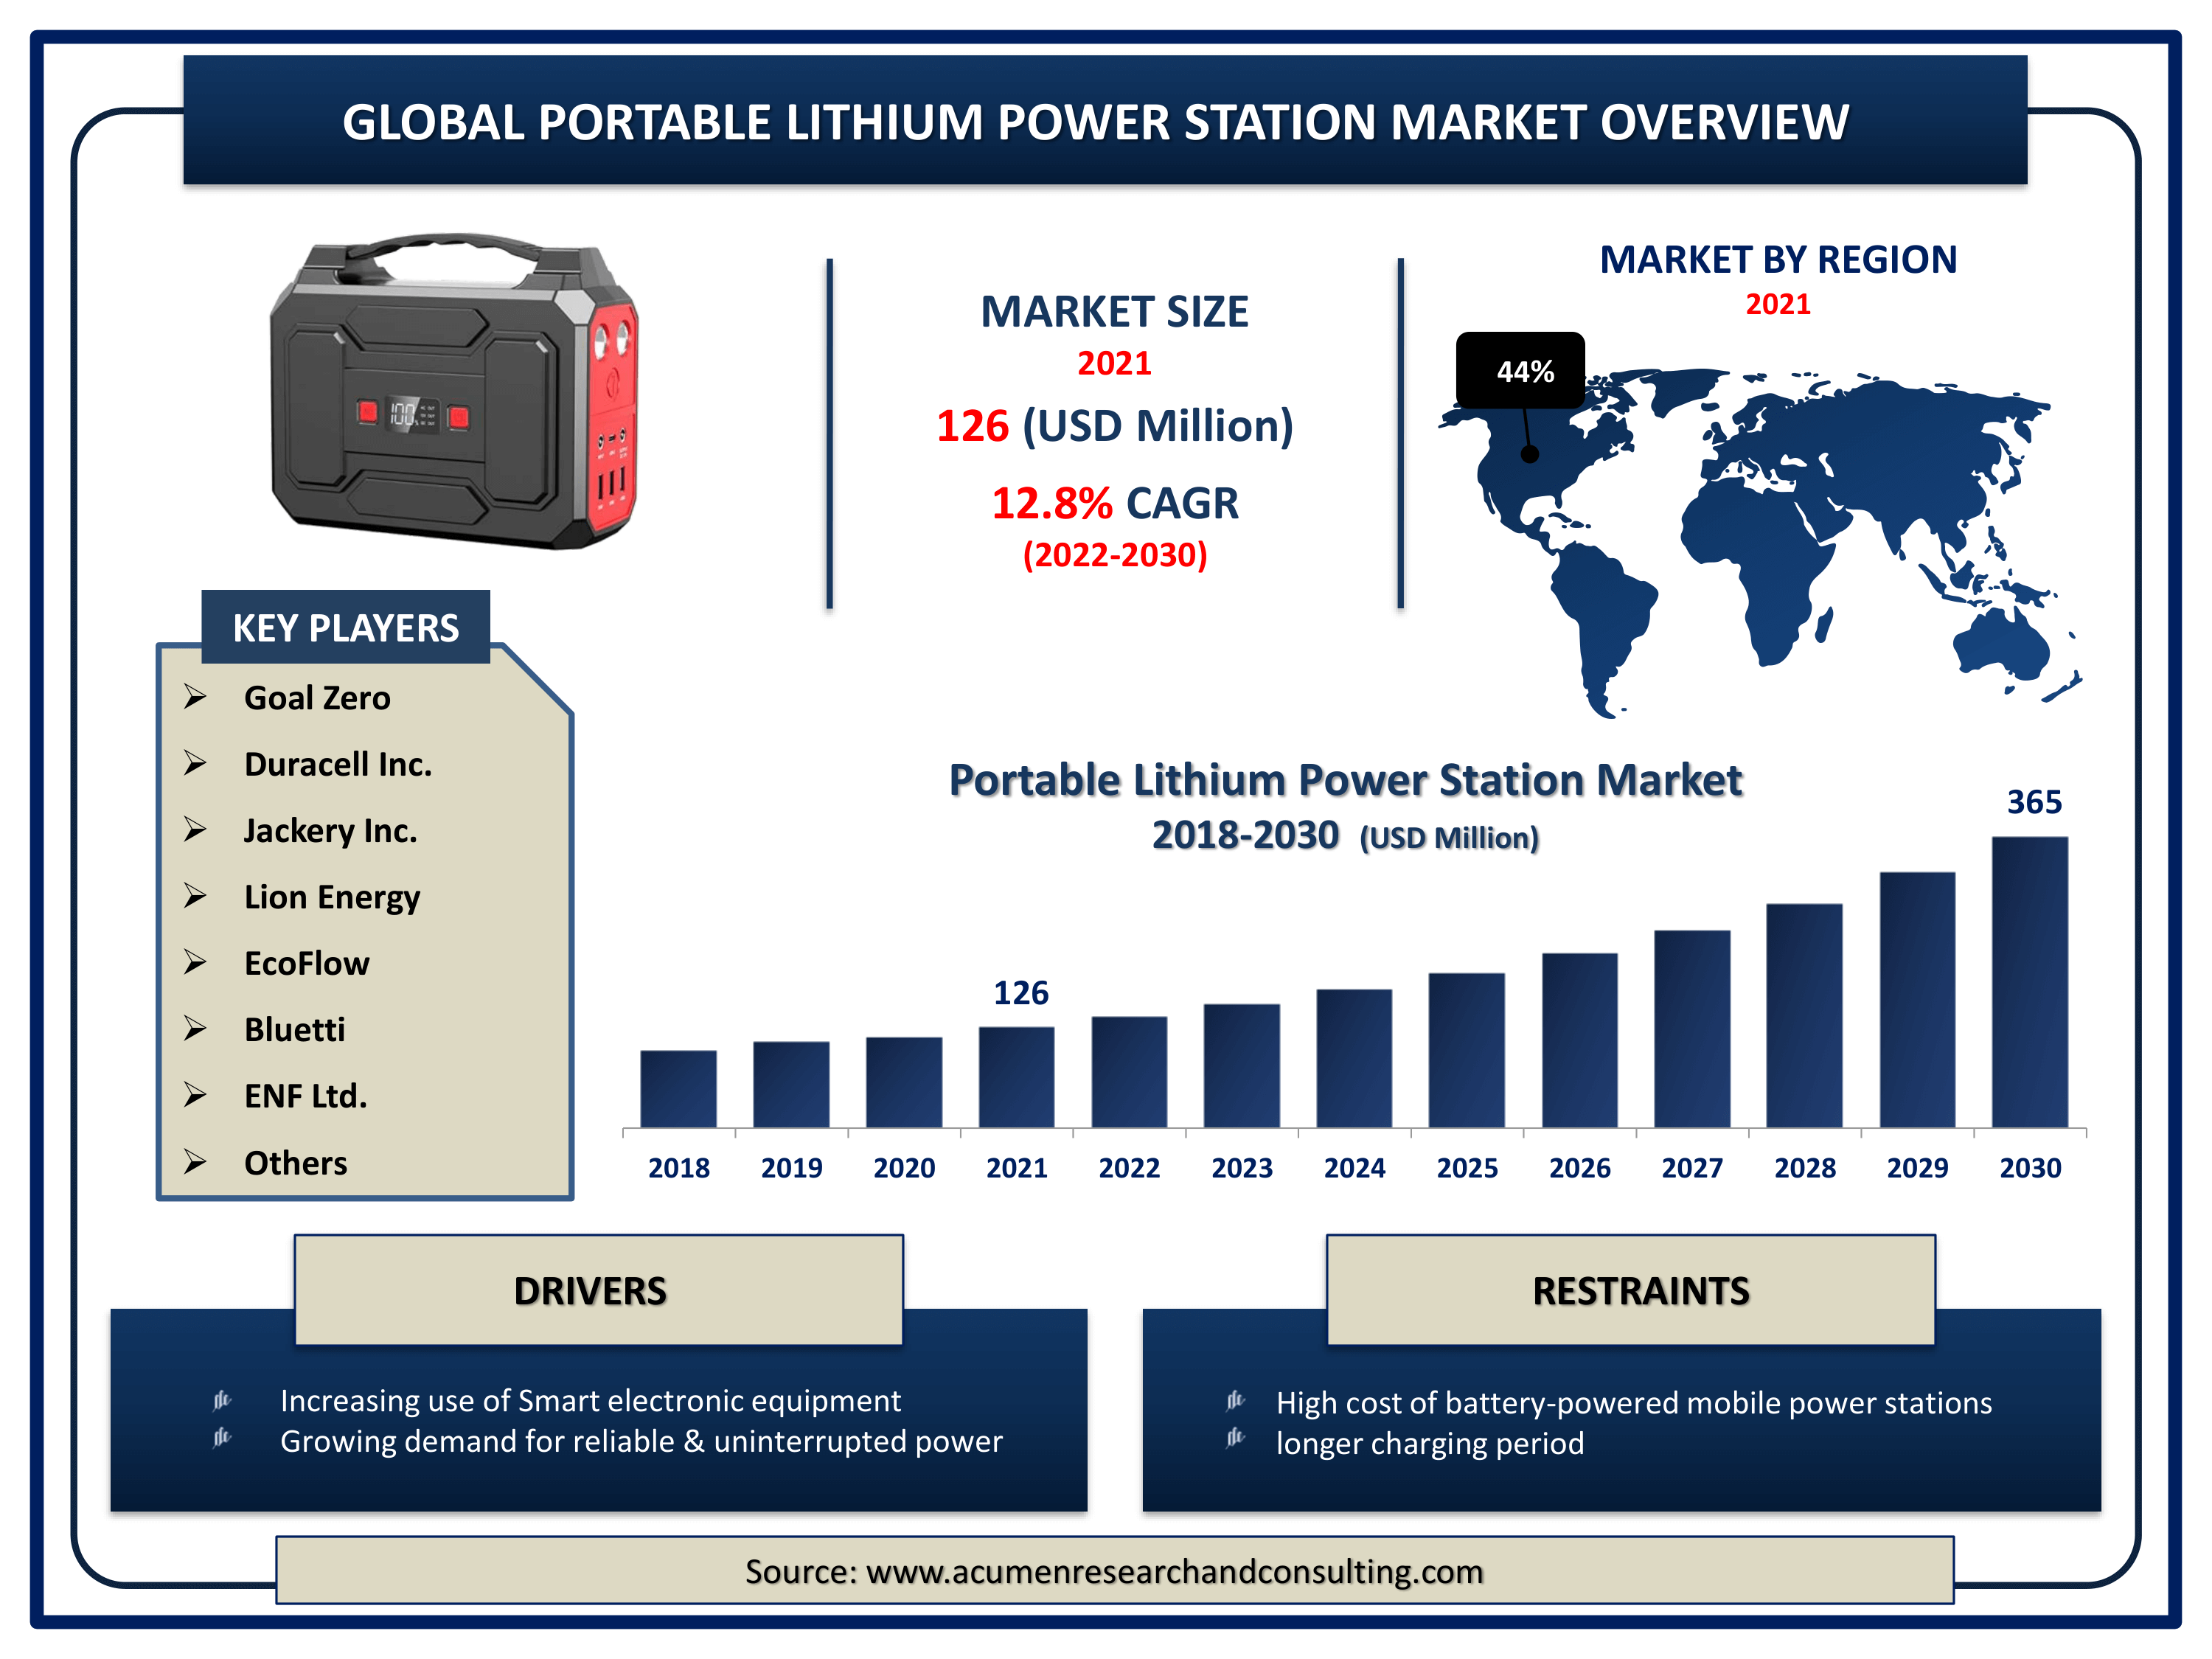 https://www.acumenresearchandconsulting.com/reportimages/Infography_Global-Portable-Lithium-Power-Station-Market.png